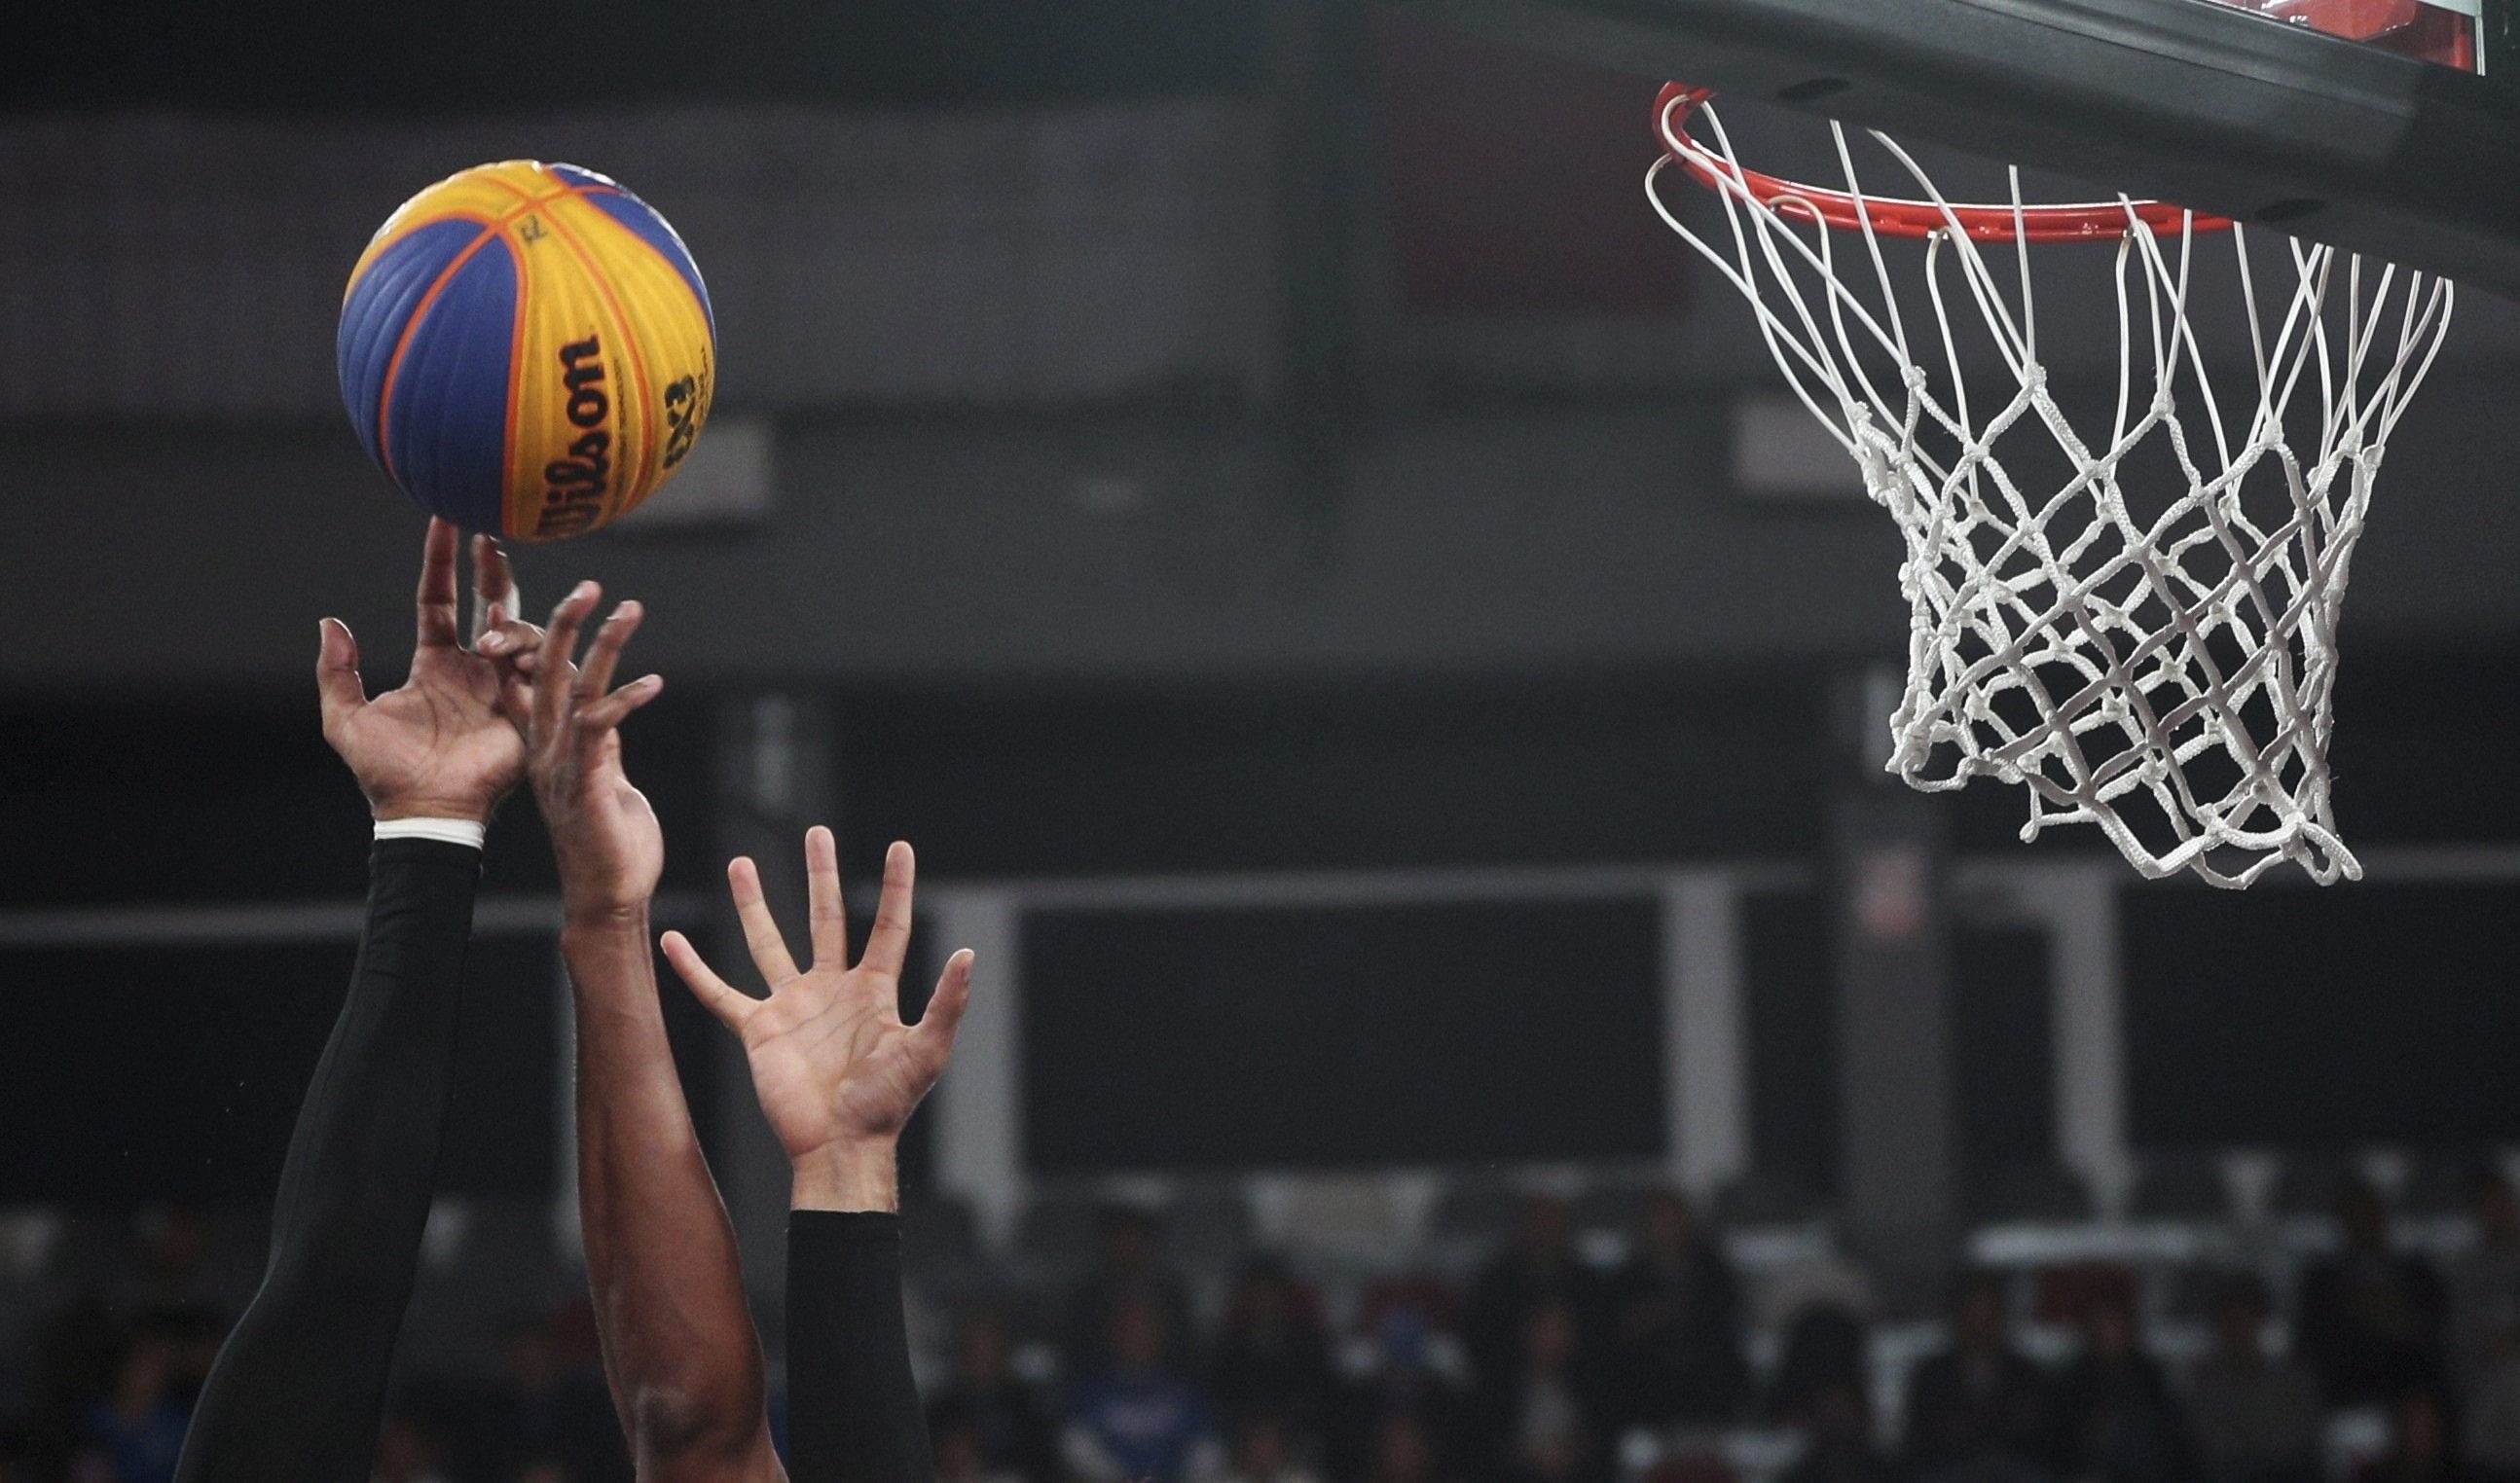 Teammates double up to block a shot during the men's basketball 3x3 semi-final match at the Pan American Games in Lima, Peru, 